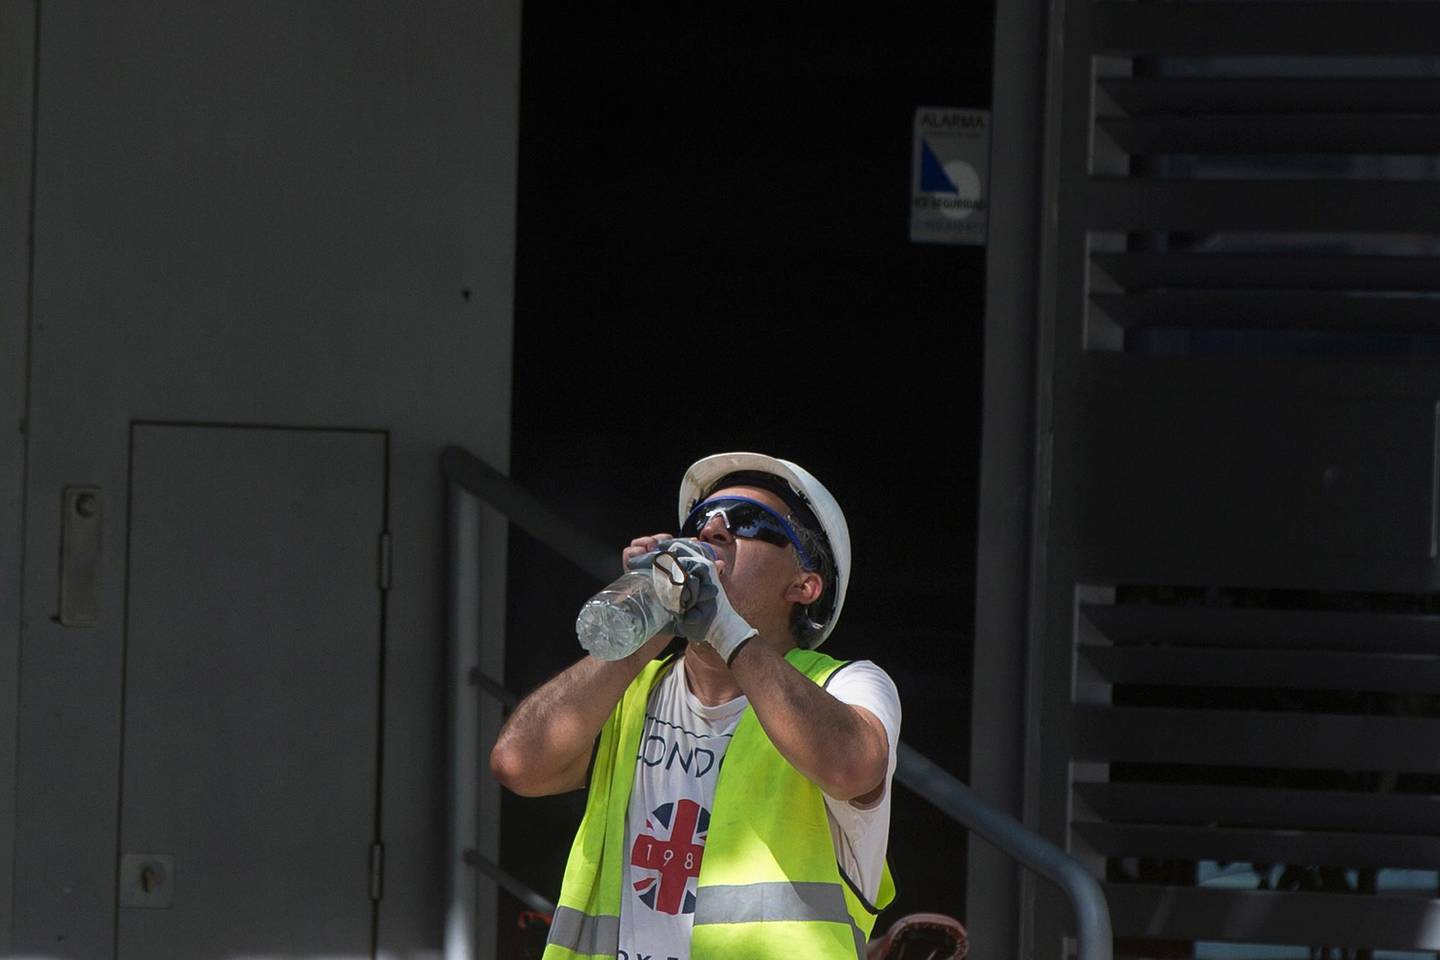 A worker stops to drink from a bottle of water in Madrid, Spain, Thursday, July 25, 2019. Points across Europe are bracing for record temperatures Thursday as the second heat wave this summer bakes the continent. Climate scientists warn this could become the new normal in many parts of the world. But temperate Europe, where air conditioning is rare and isn't equipped for the temperatures frying the region this week. (AP Photo/Paul White)